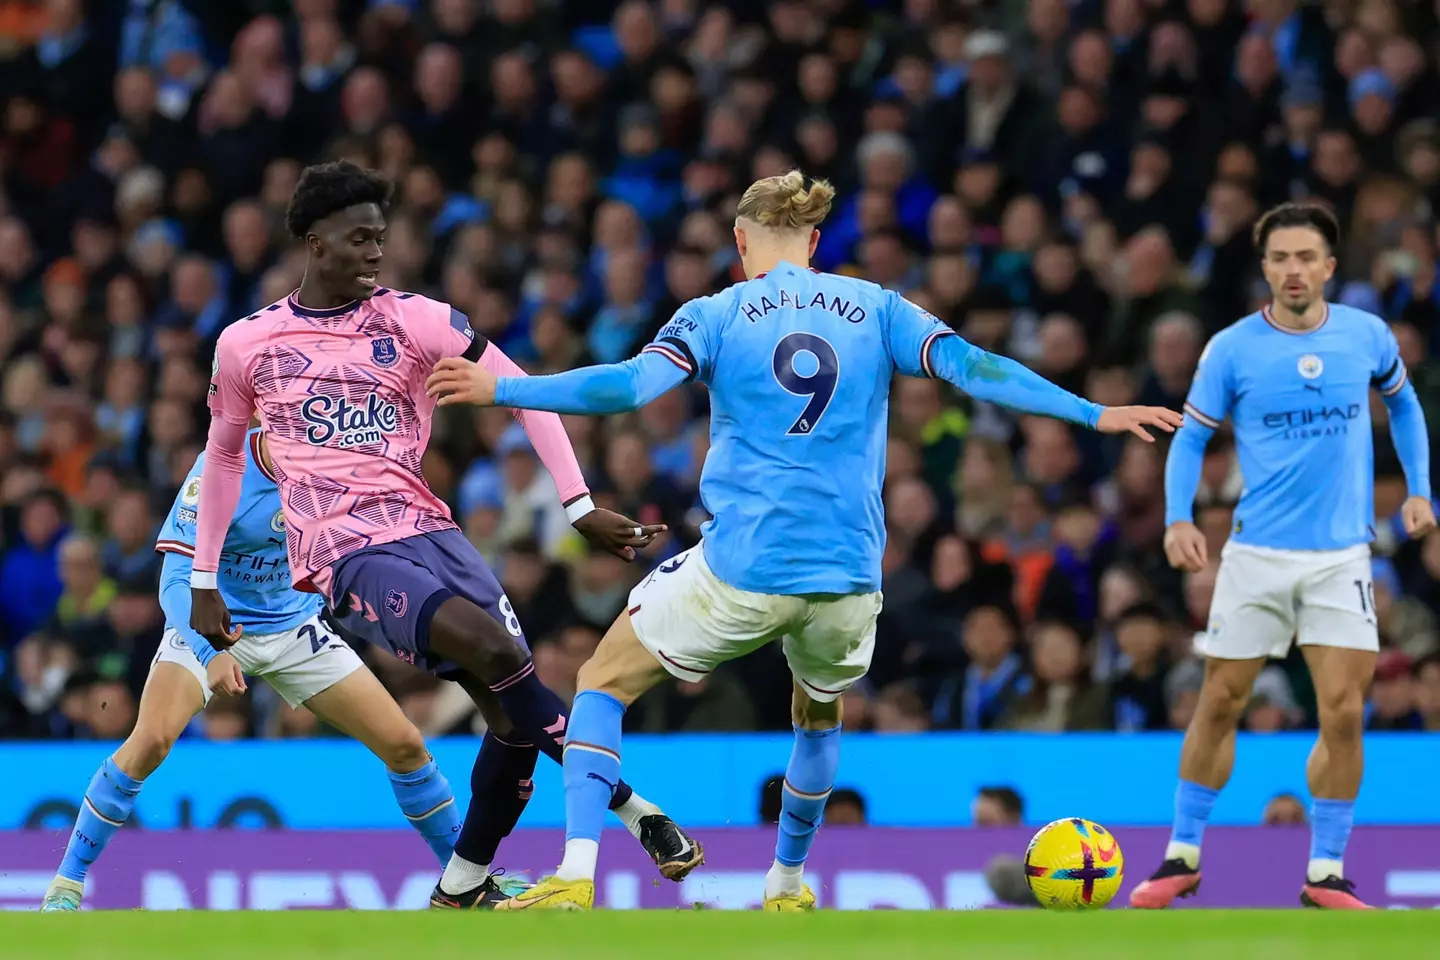 Onana in action against Manchester City. (Image